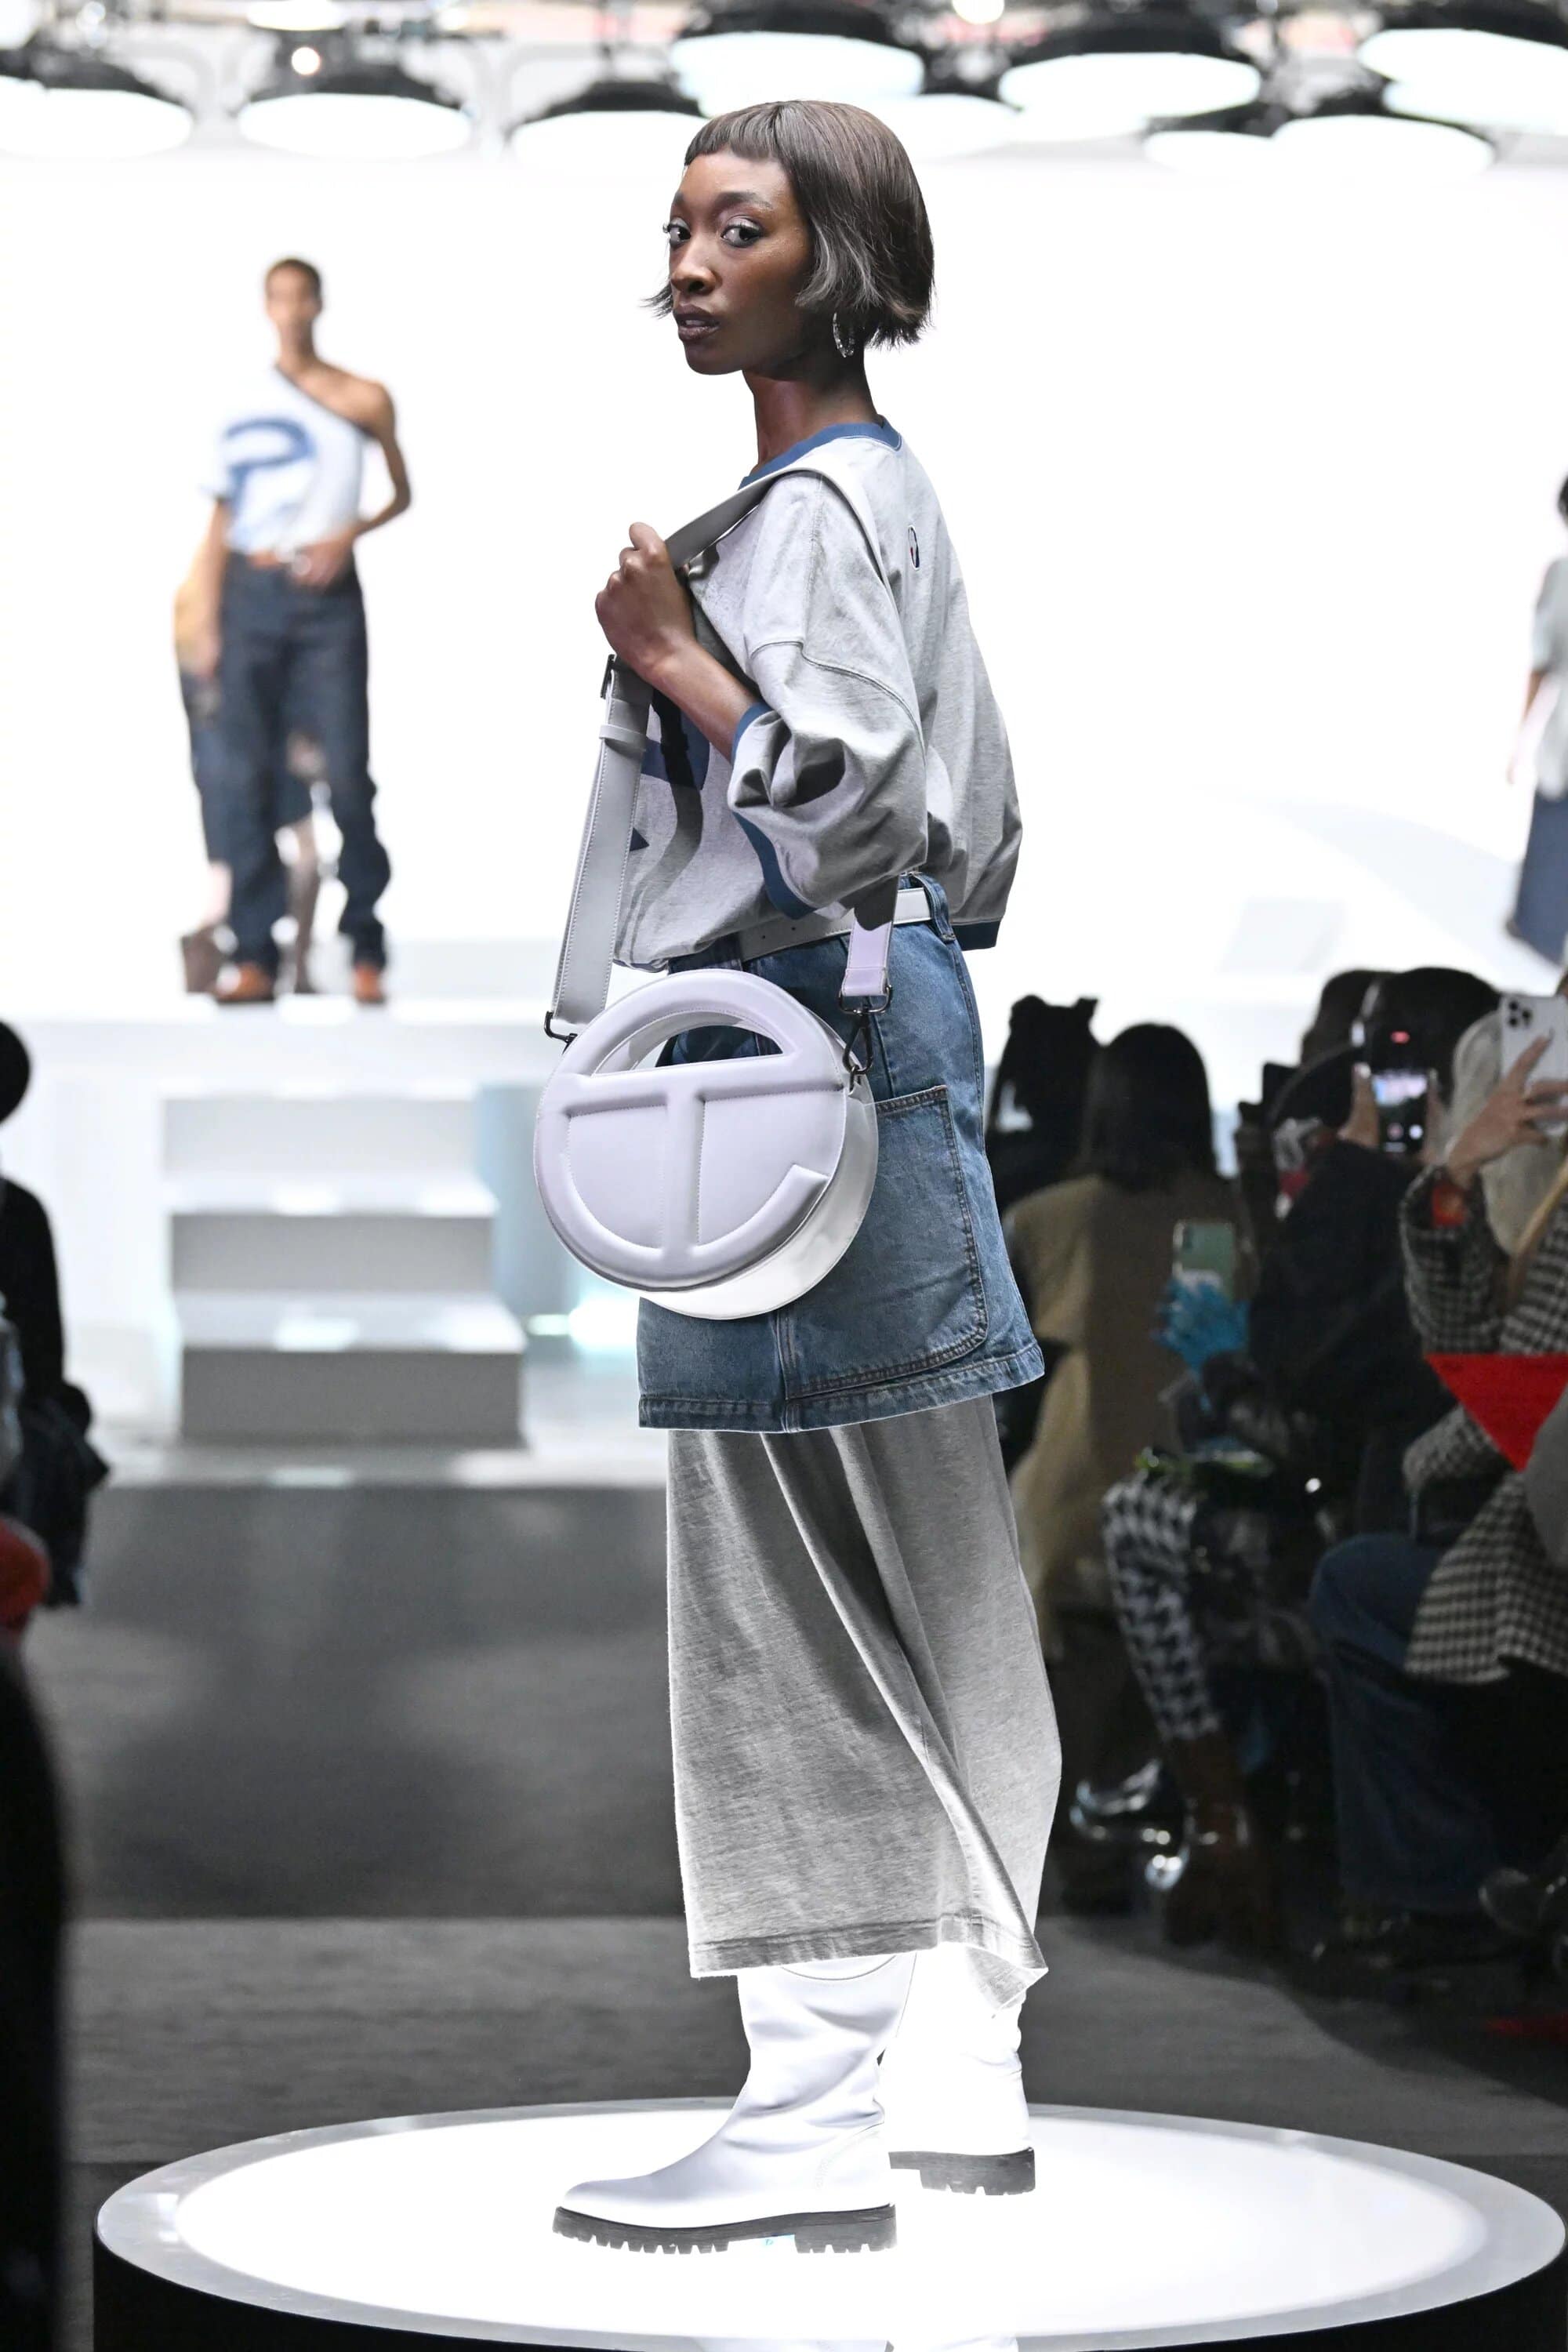 10 years after its debut on the Chanel catwalk, the Hoop bag